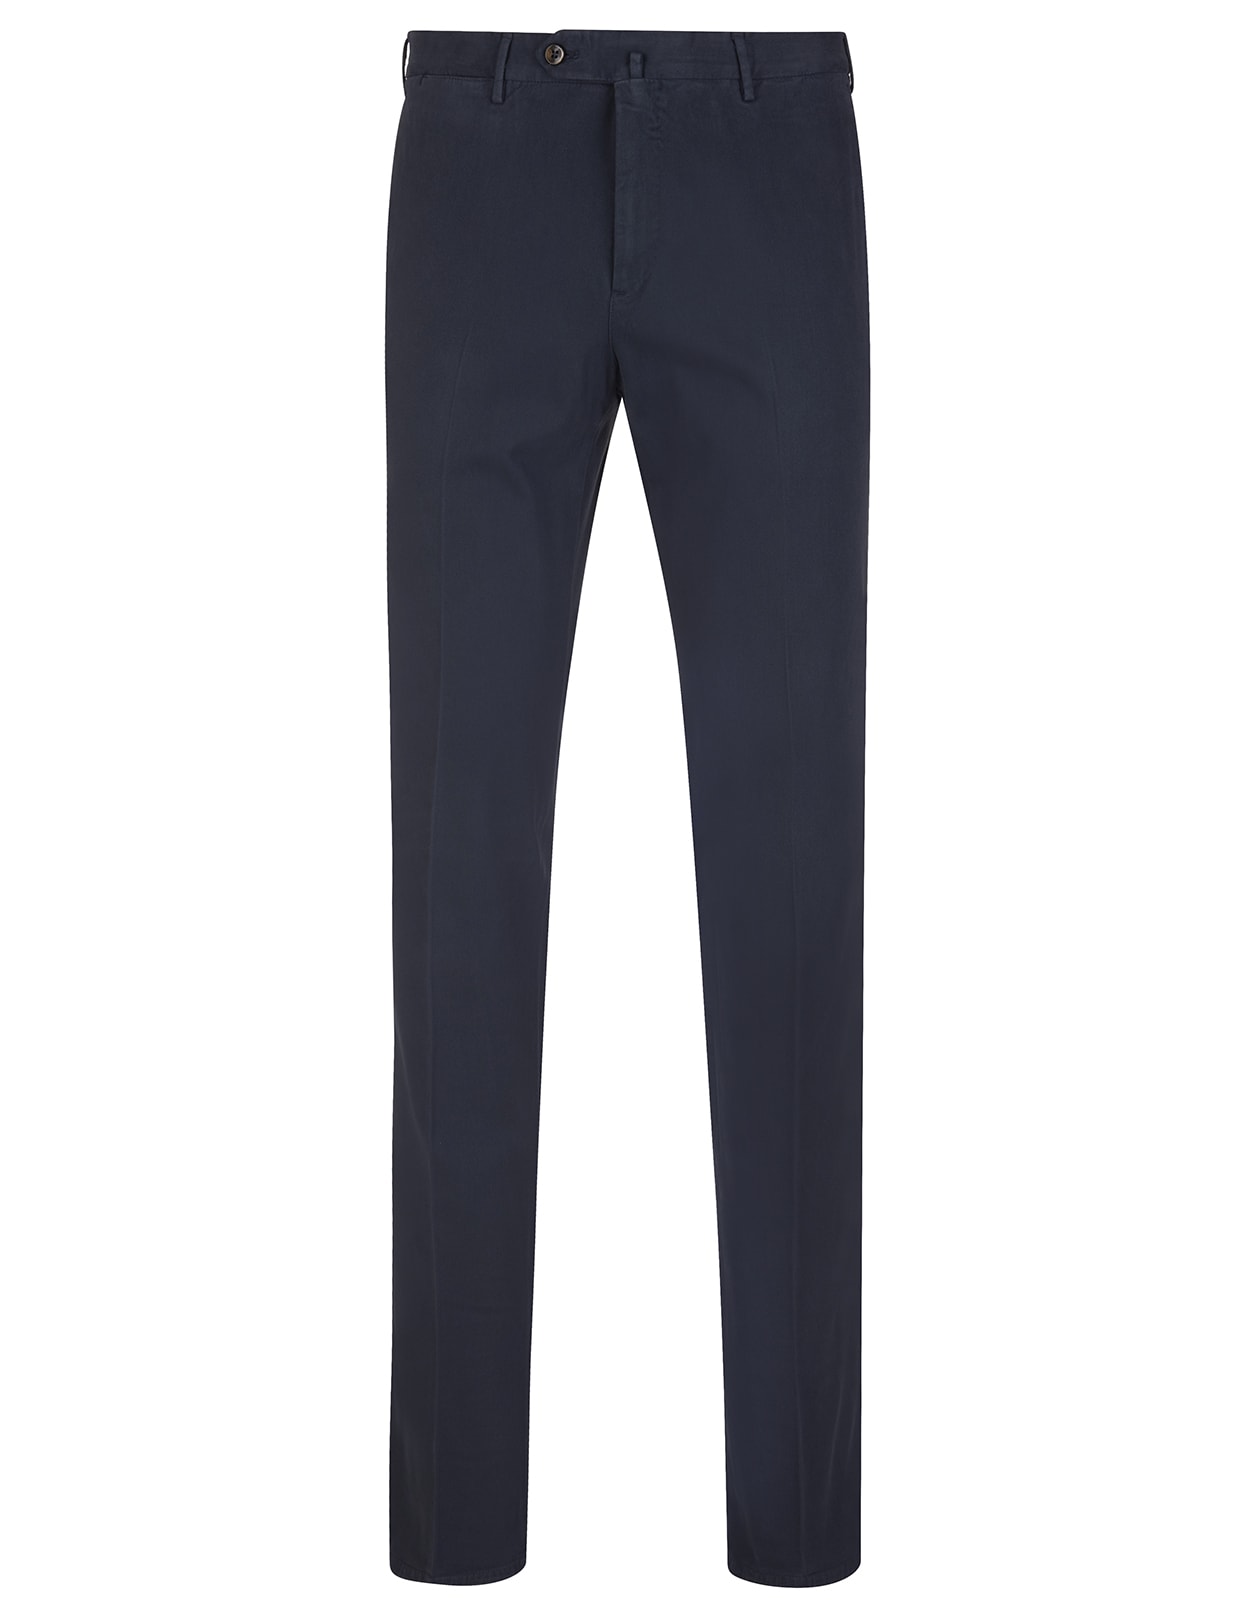 PT01 Man Slim Fit Trousers In Navy Blue Stretch Cotton